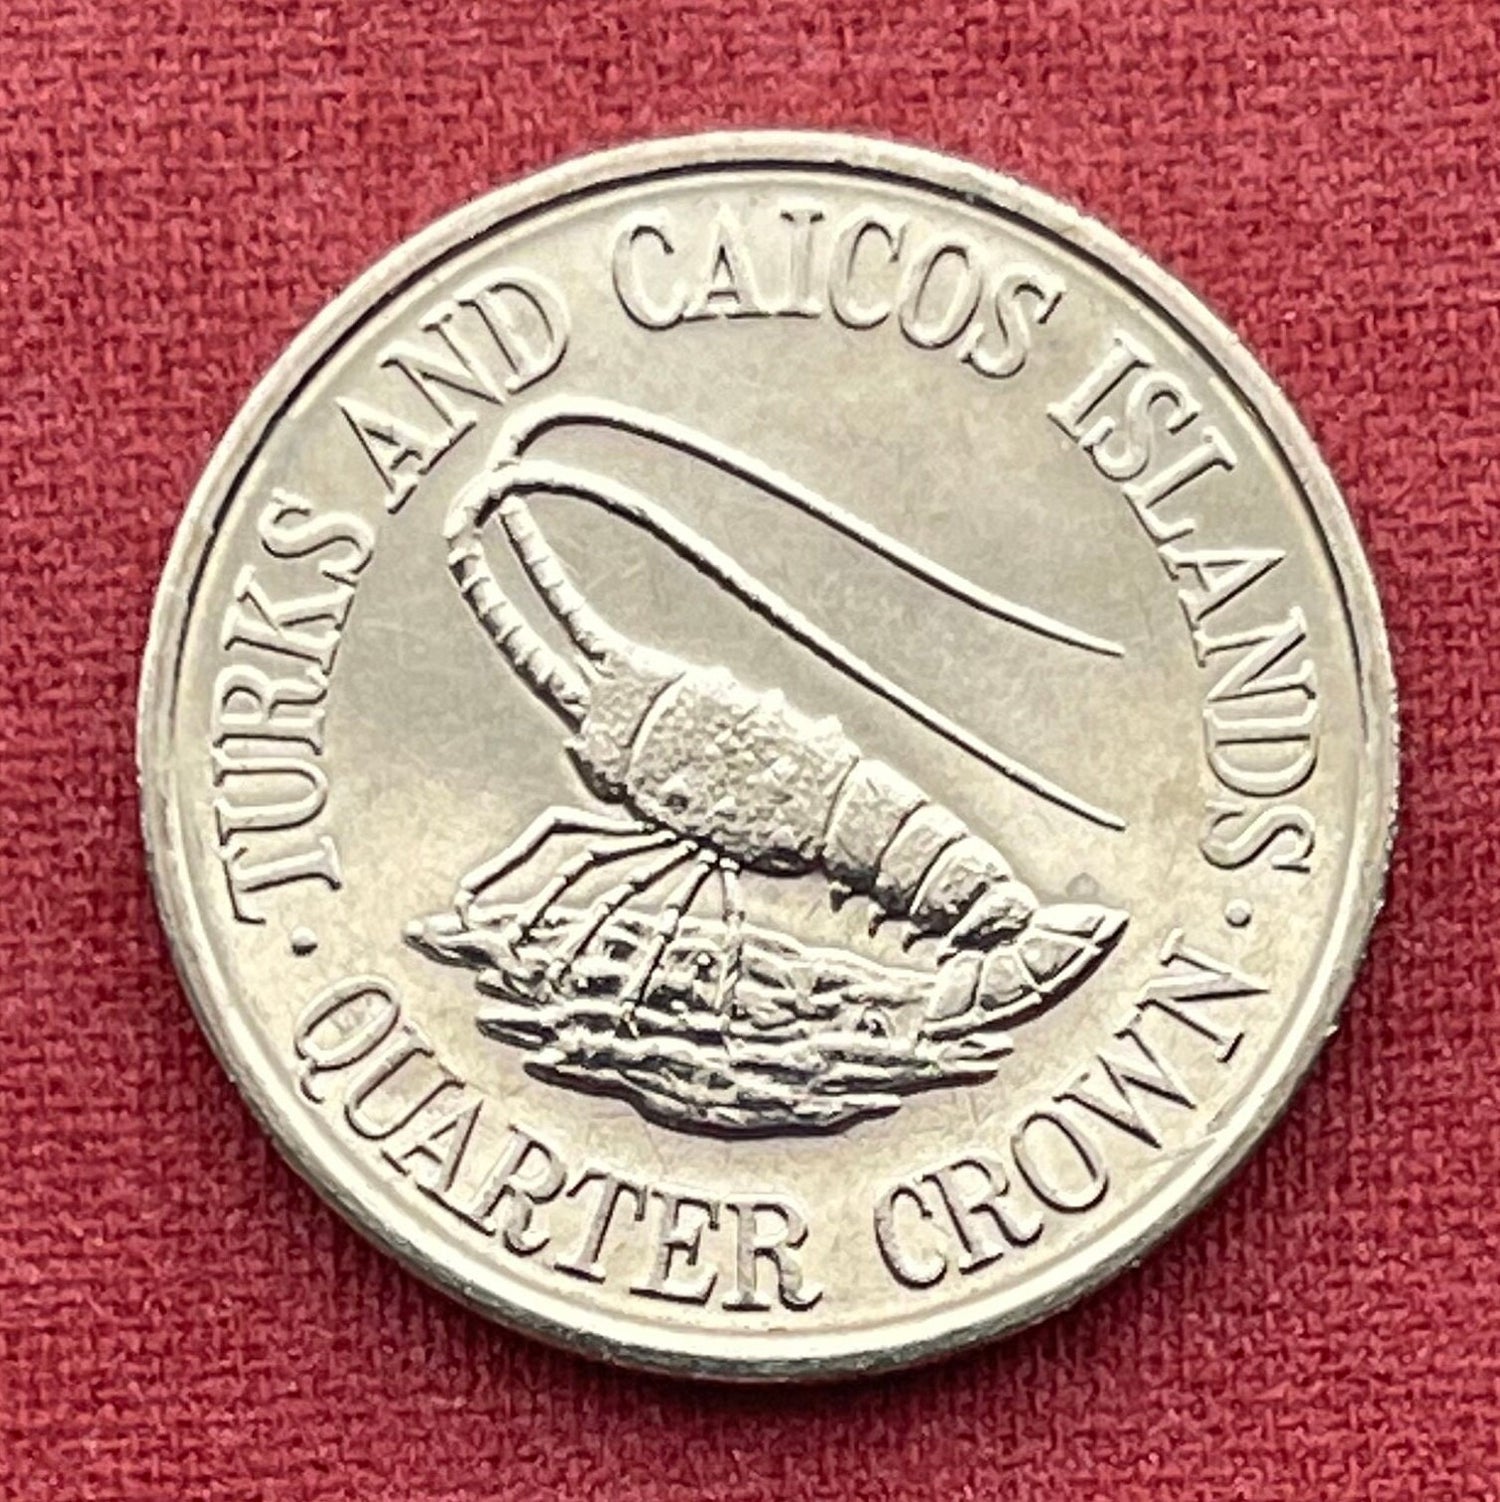 Spiny Lobster Quarter Crown Turks and Caicos Authentic Coin Money for Jewelry and Craft Making (1981) (Sea Crayfish) (Langusta)